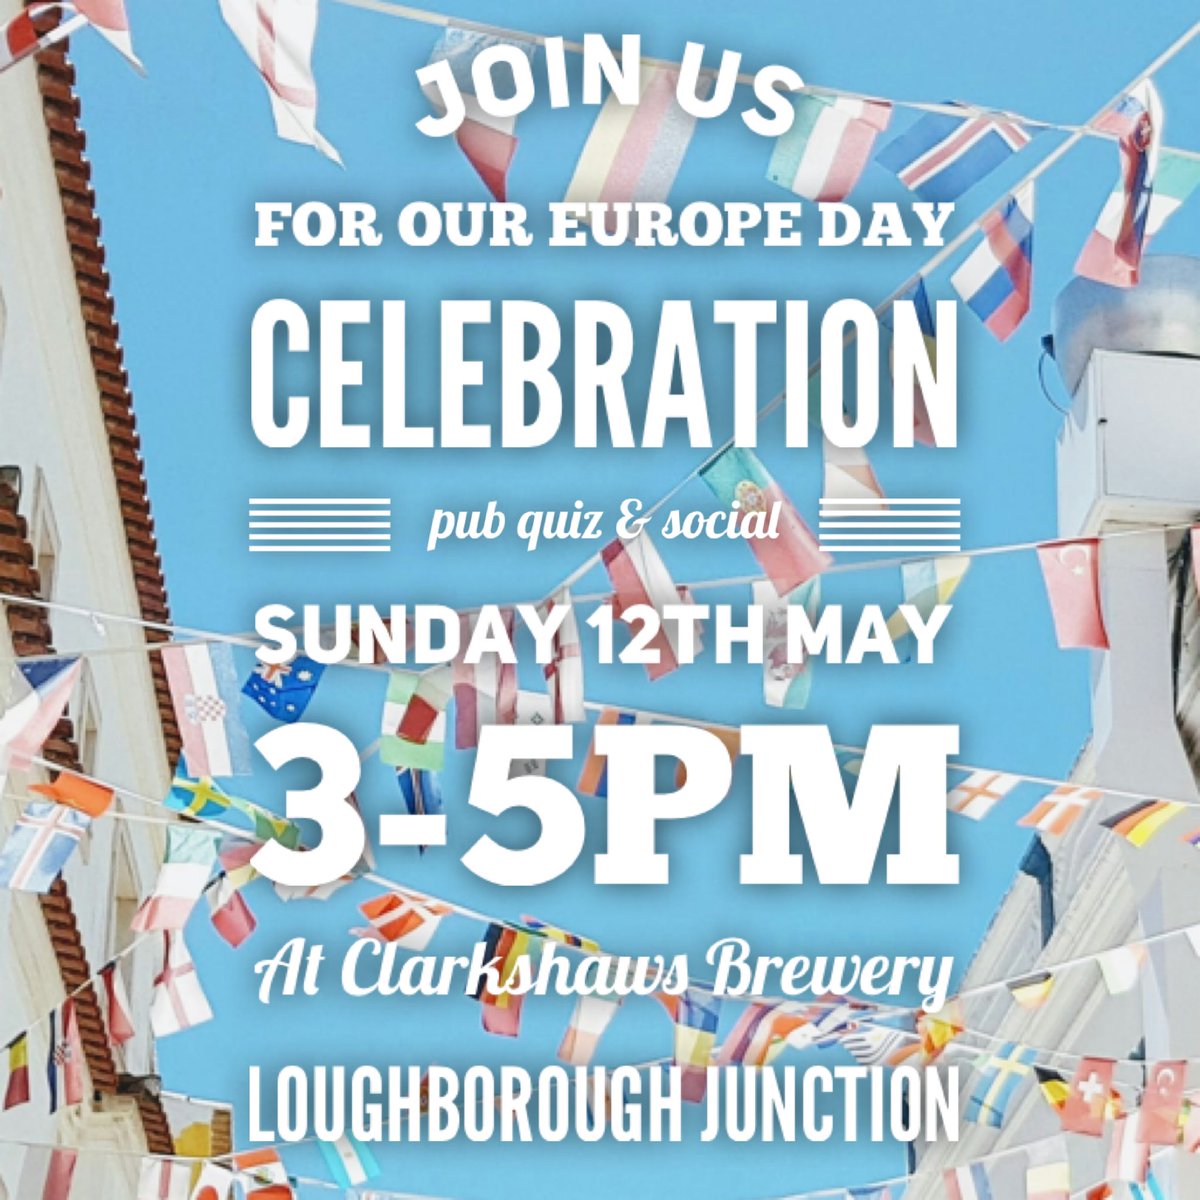 We'd love to you see next weekend at our Europe Day knees-up which is once again graciously hosted by @Clarkshaws in Loughborough Junction.